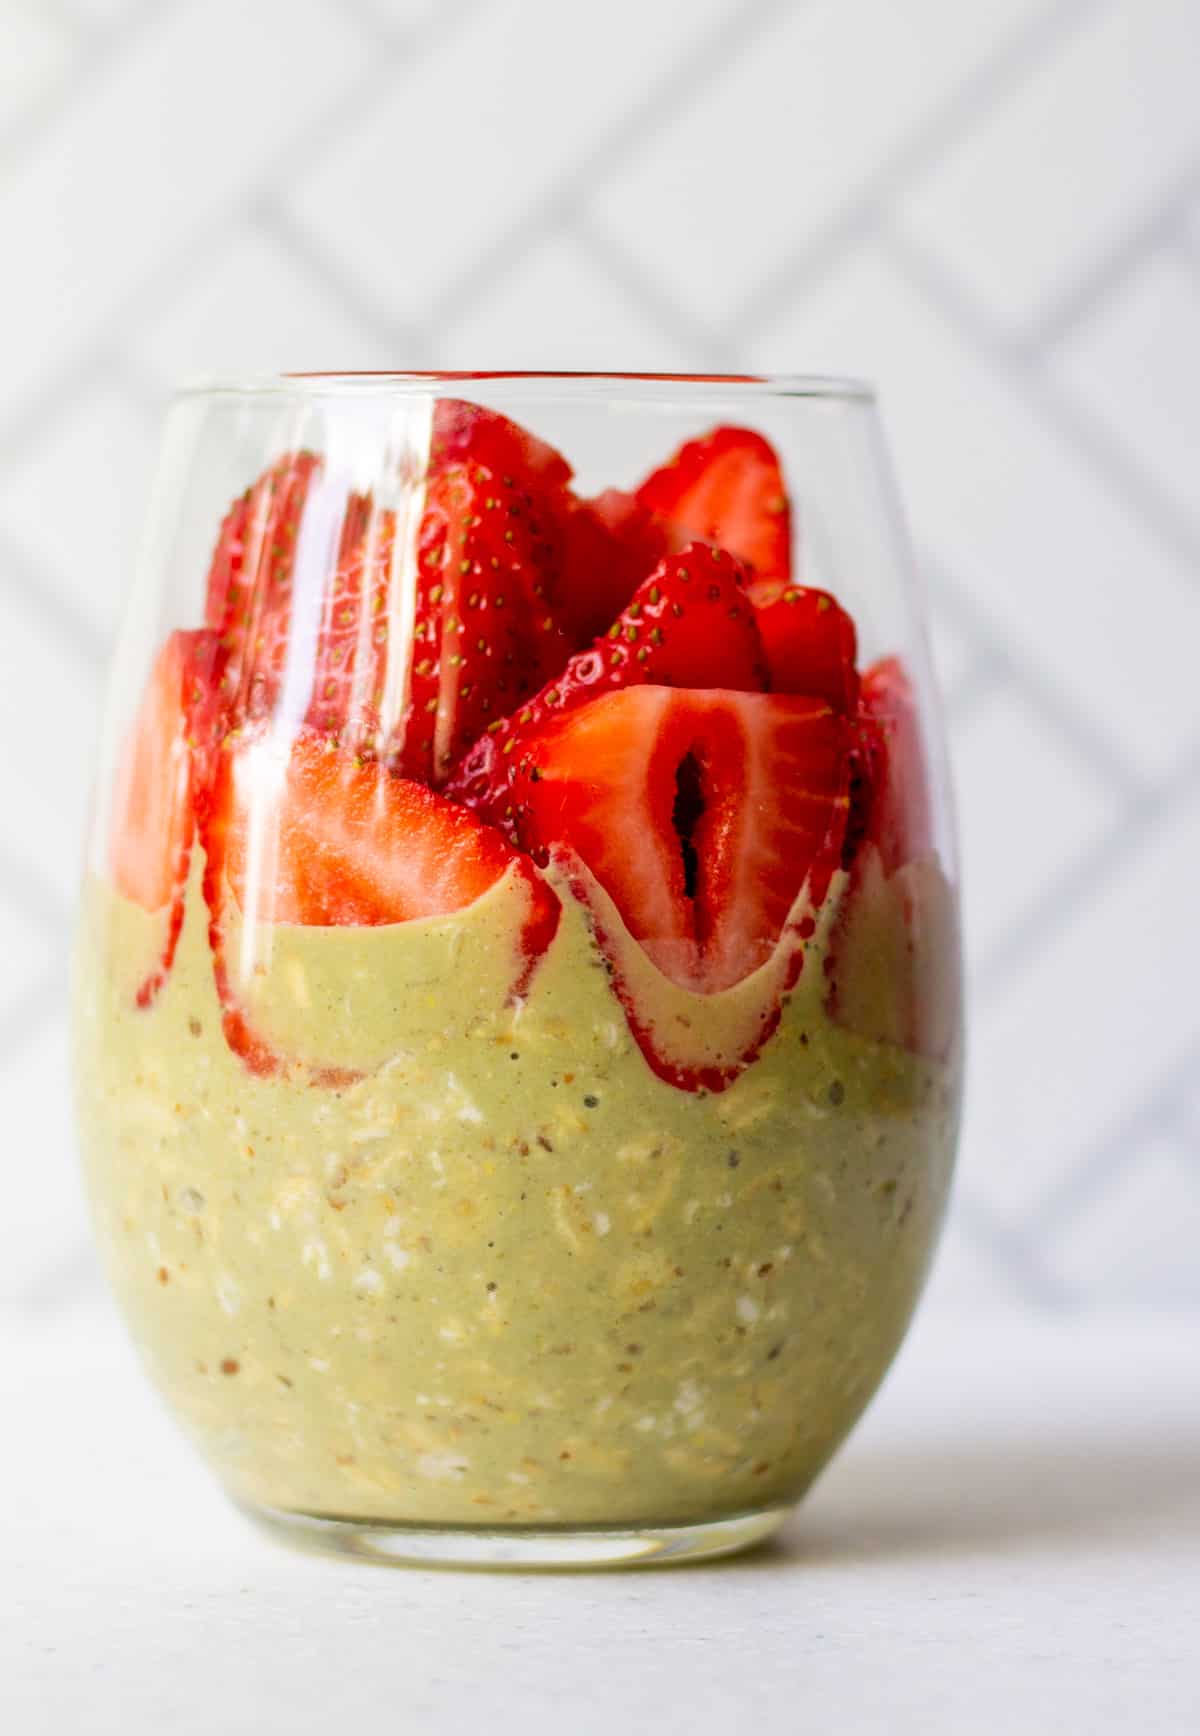 pretty glass with matcha overnight oats and sliced strawberries on top